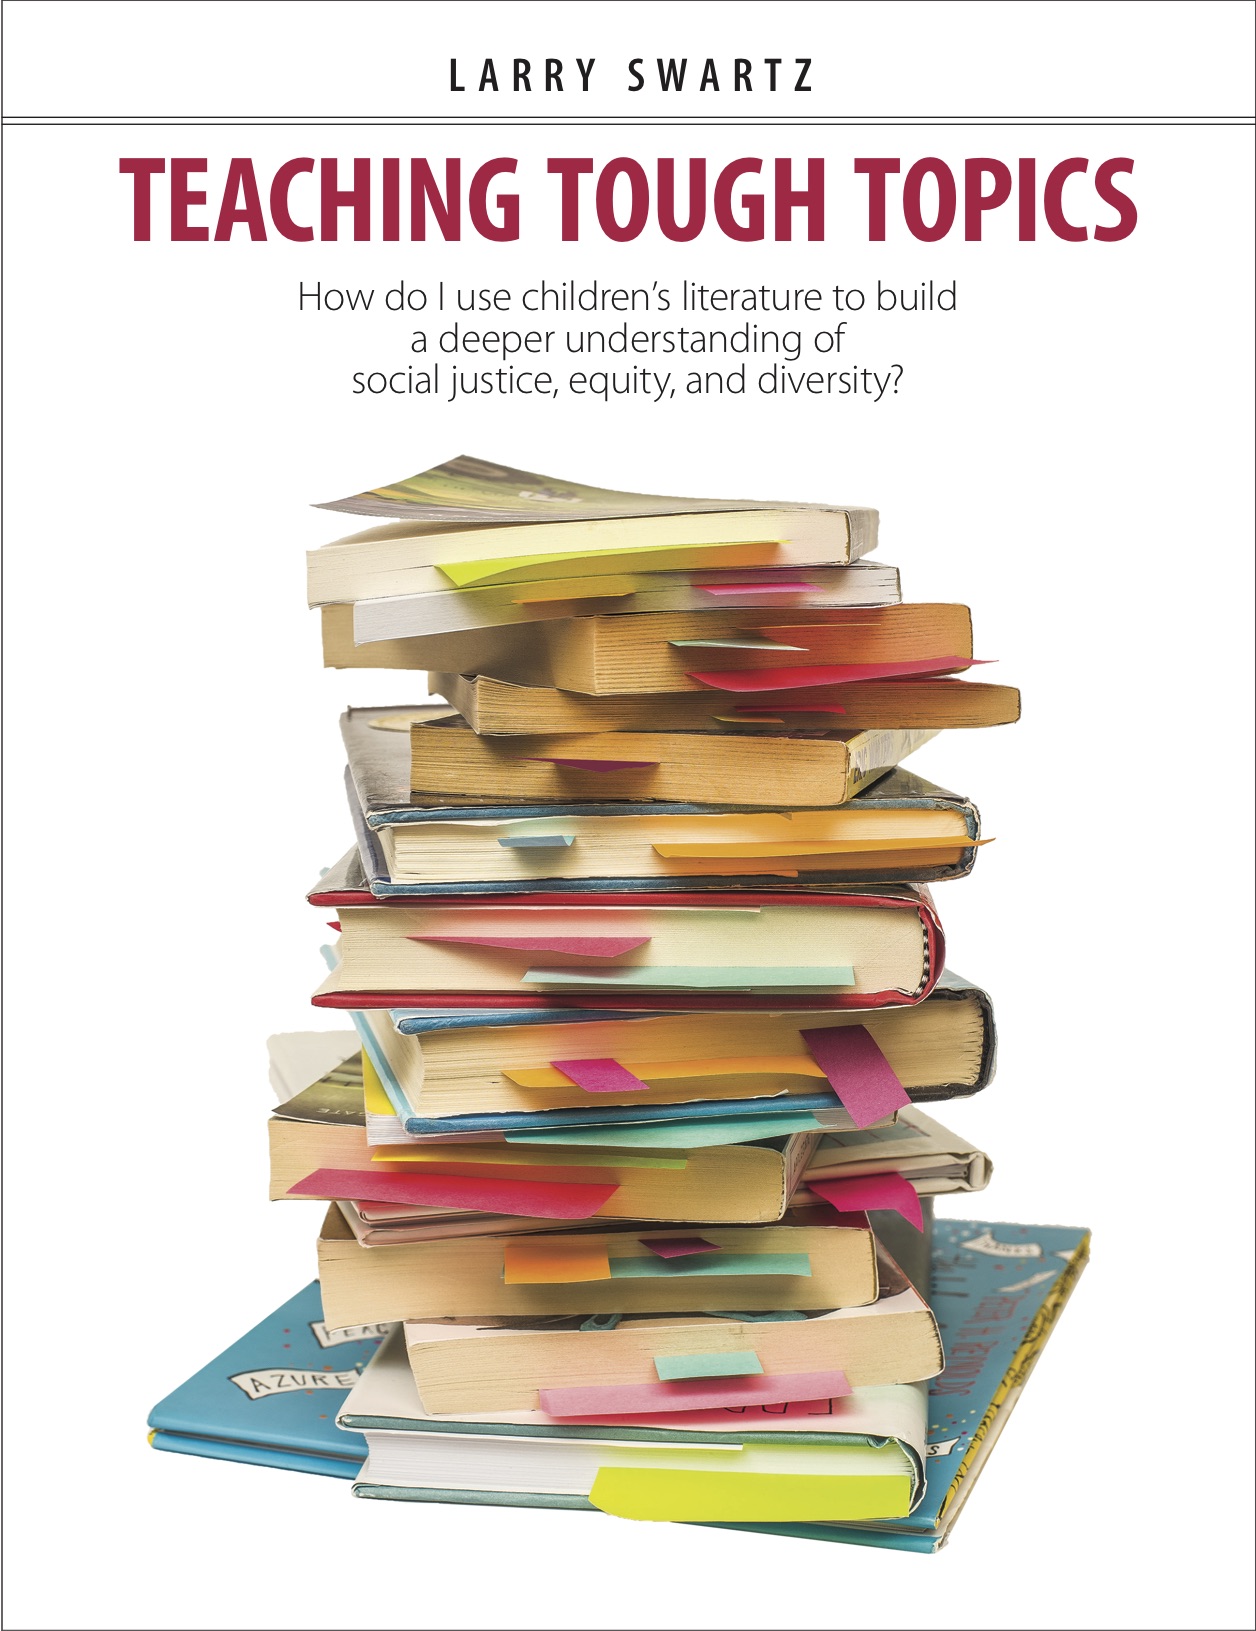 Teaching Tough Topics: How do I use children’s literature to build a deeper understanding of social justice, equity, and diversity?